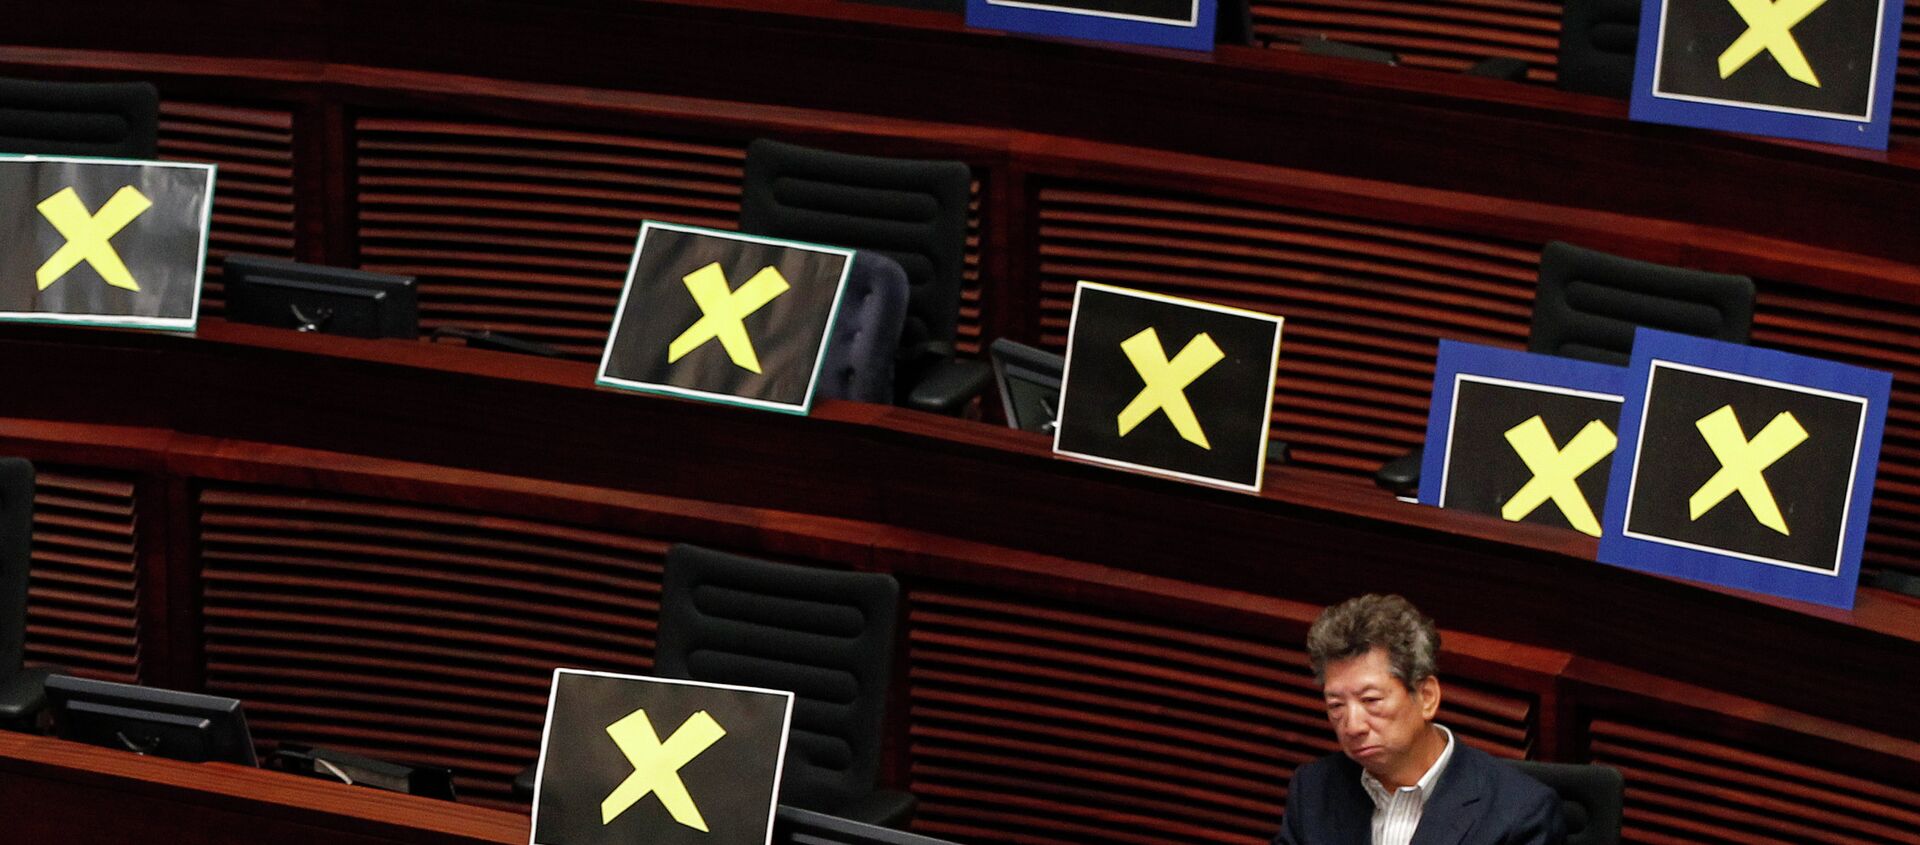 Pro-democracy lawmaker Ronny Tong sits with placards of yellow crosses placed  - Sputnik International, 1920, 22.02.2021